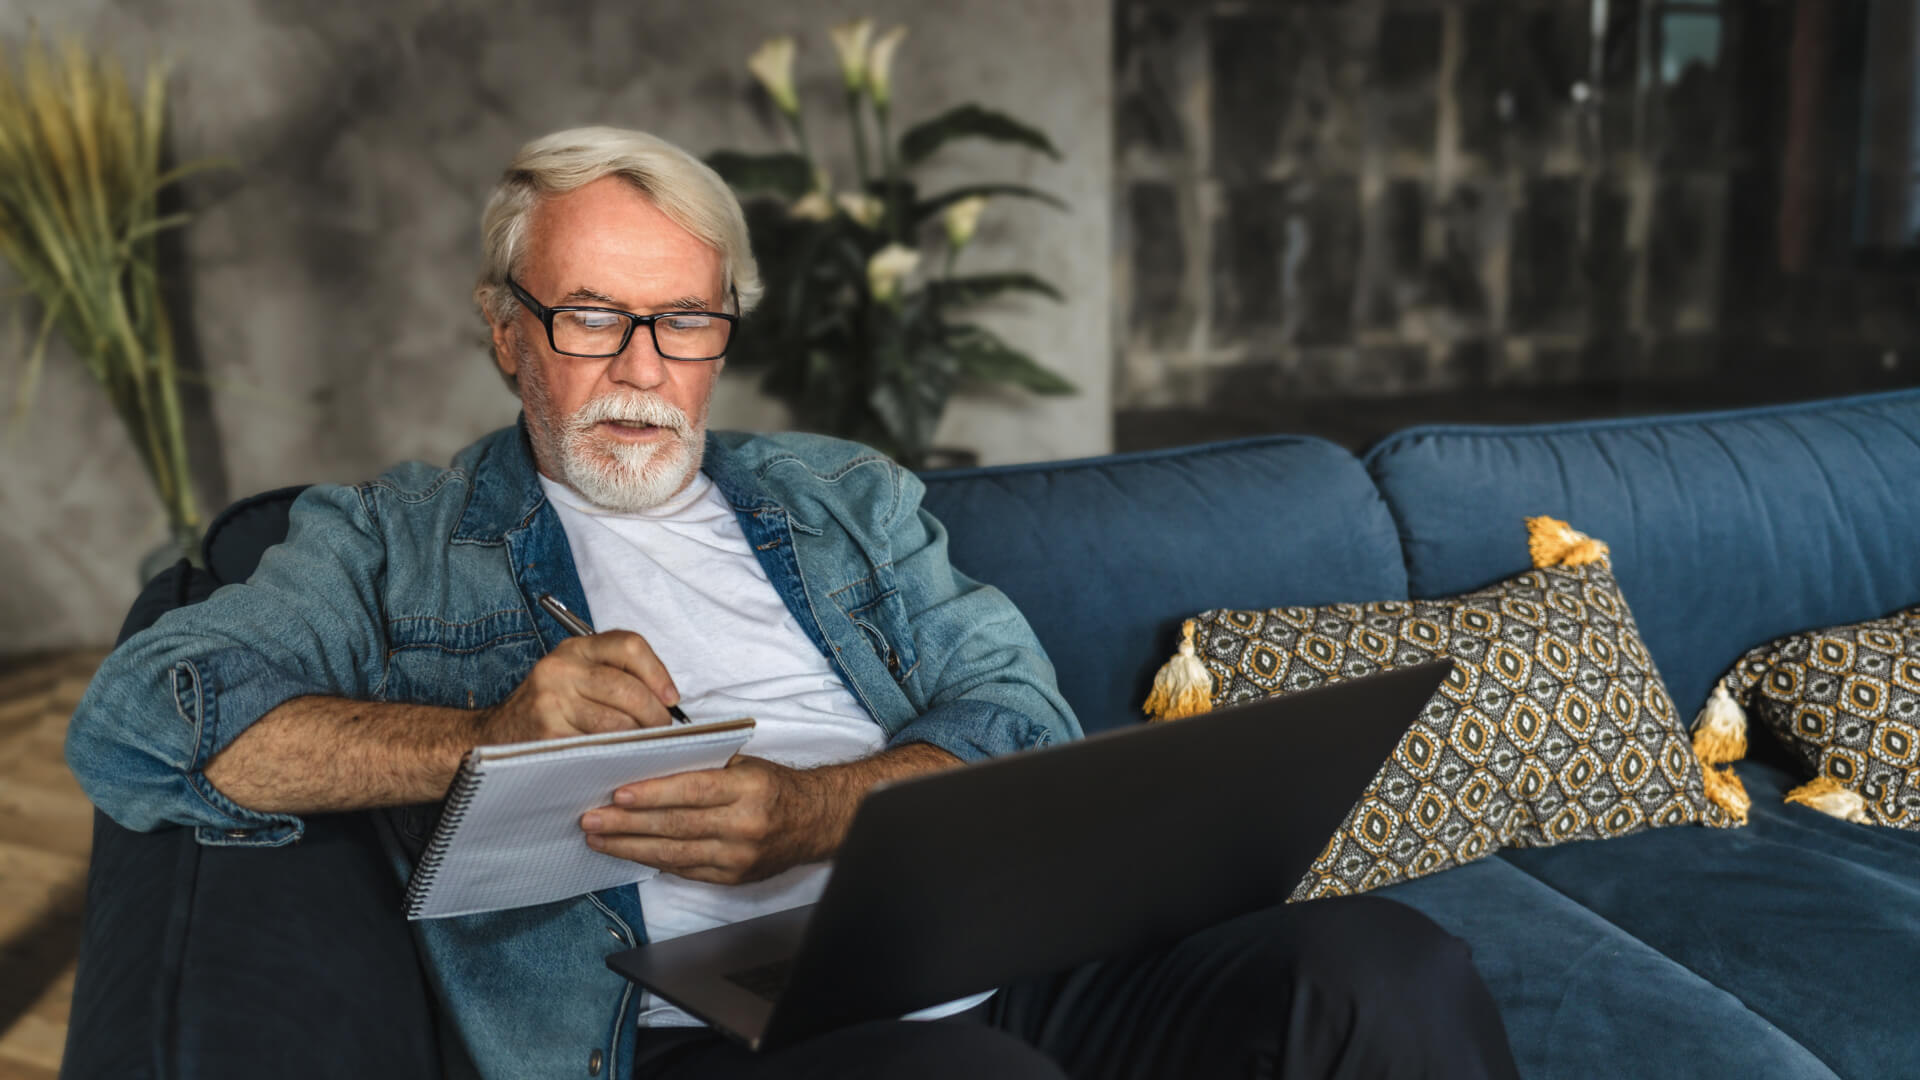 Senior man with glasses sitting on couch with notepad and laptop in lap